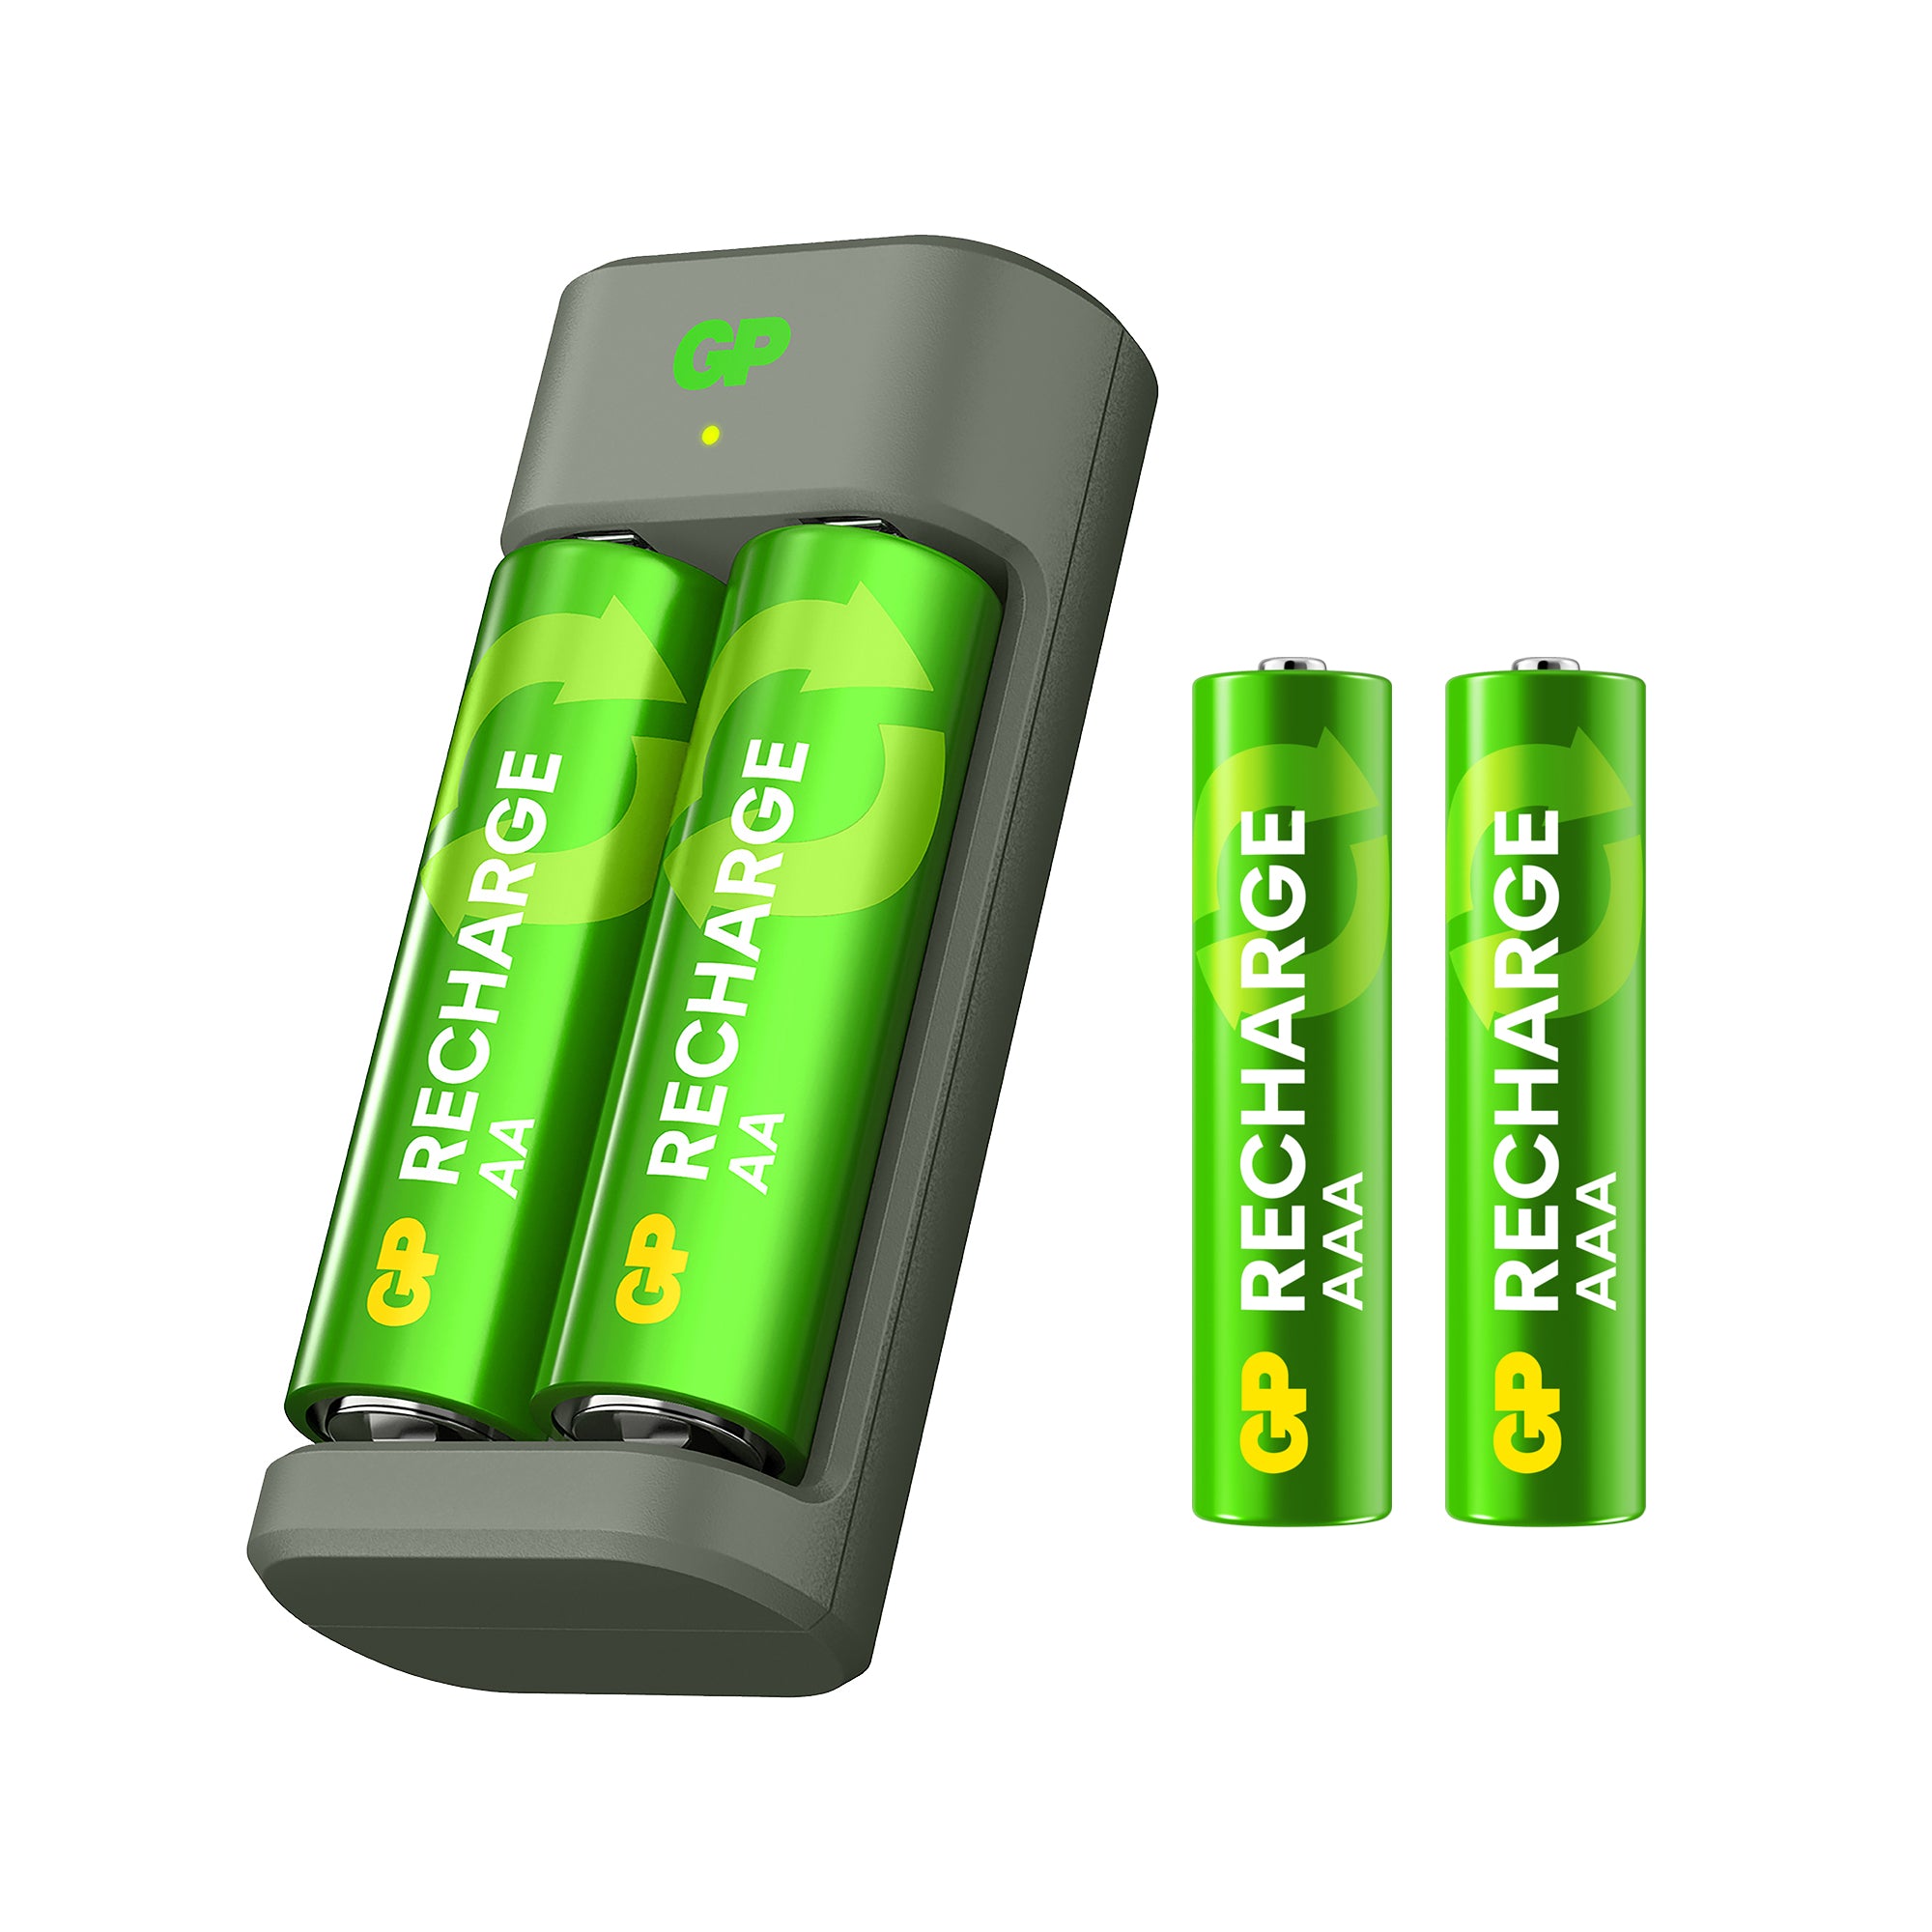 GP Recharge Charger with 2pc AA 1000mAh + 2pc AAA 400mAh NiMH Batteries